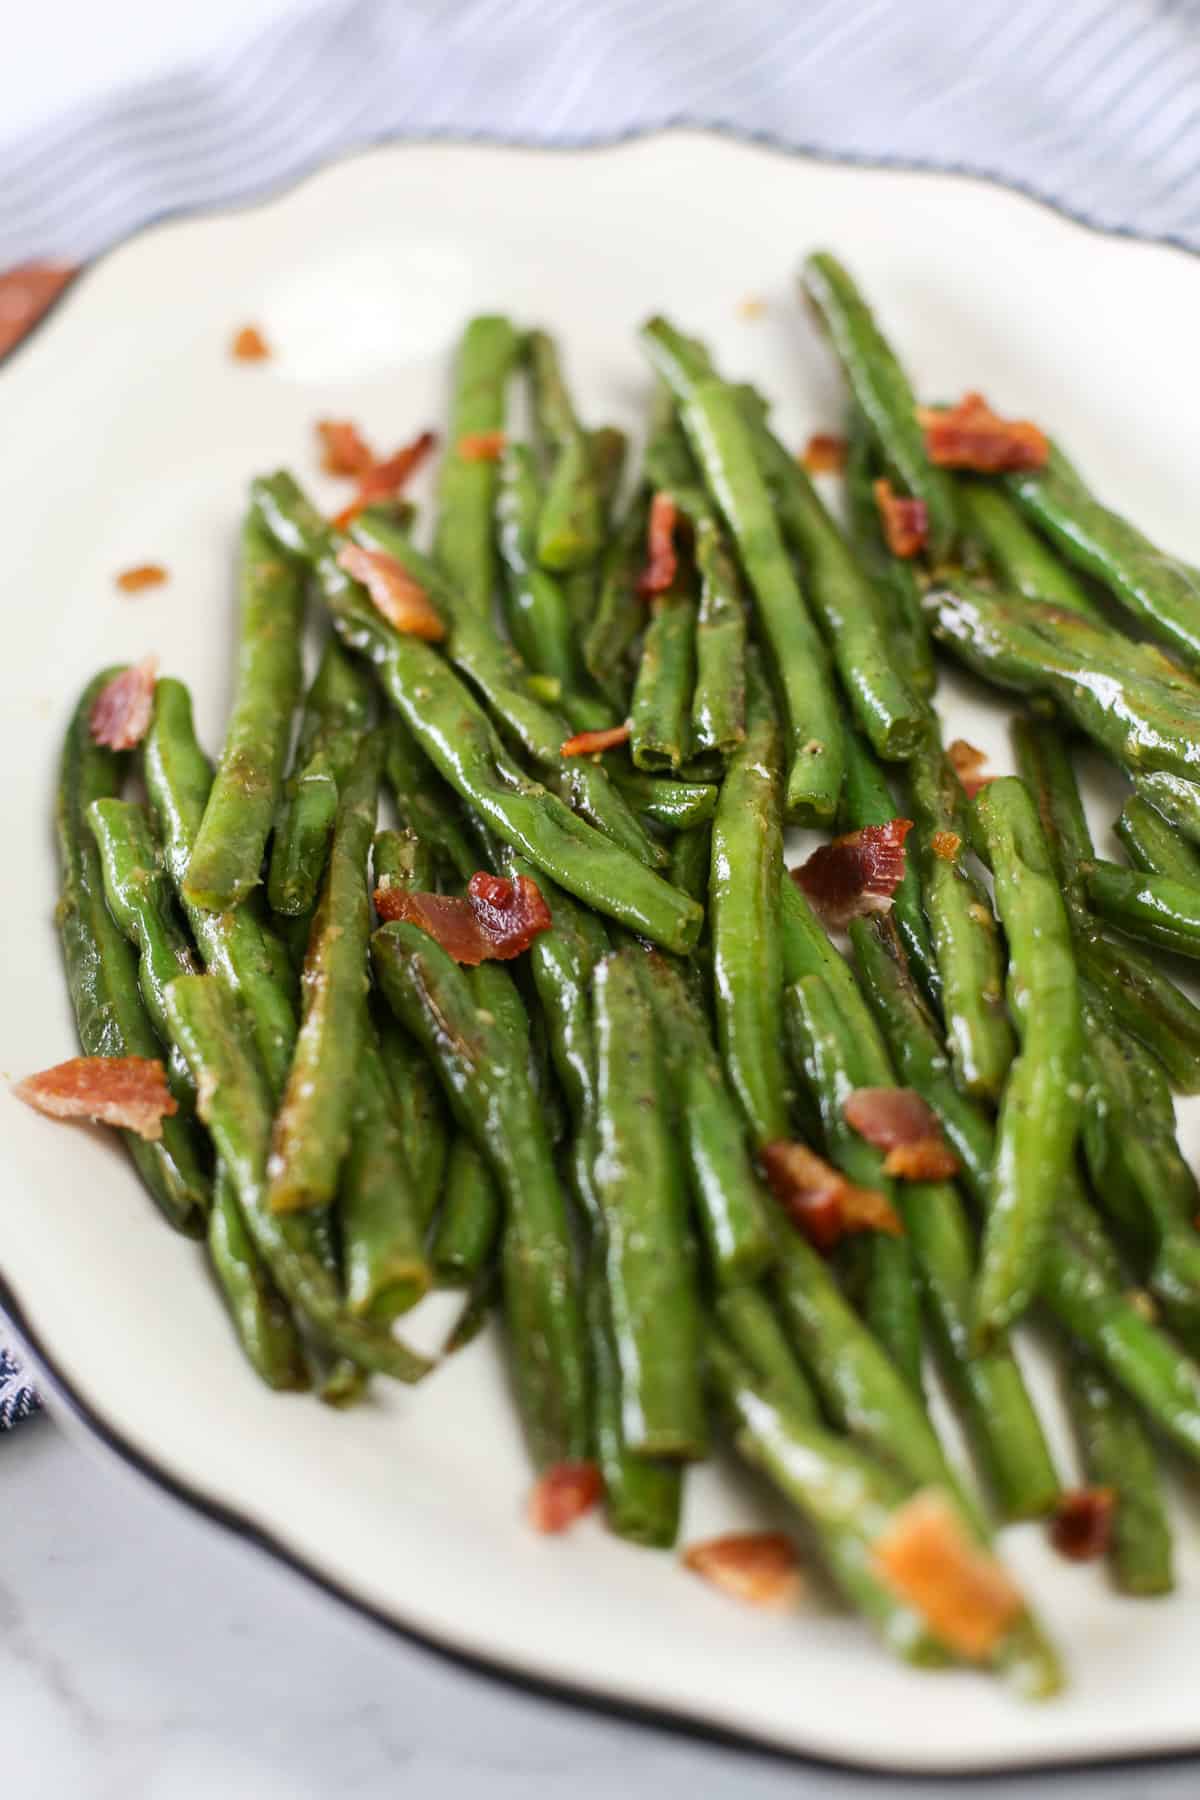 Garlic Green Beans served on a white plate with bacon pieces sprinkled on top.